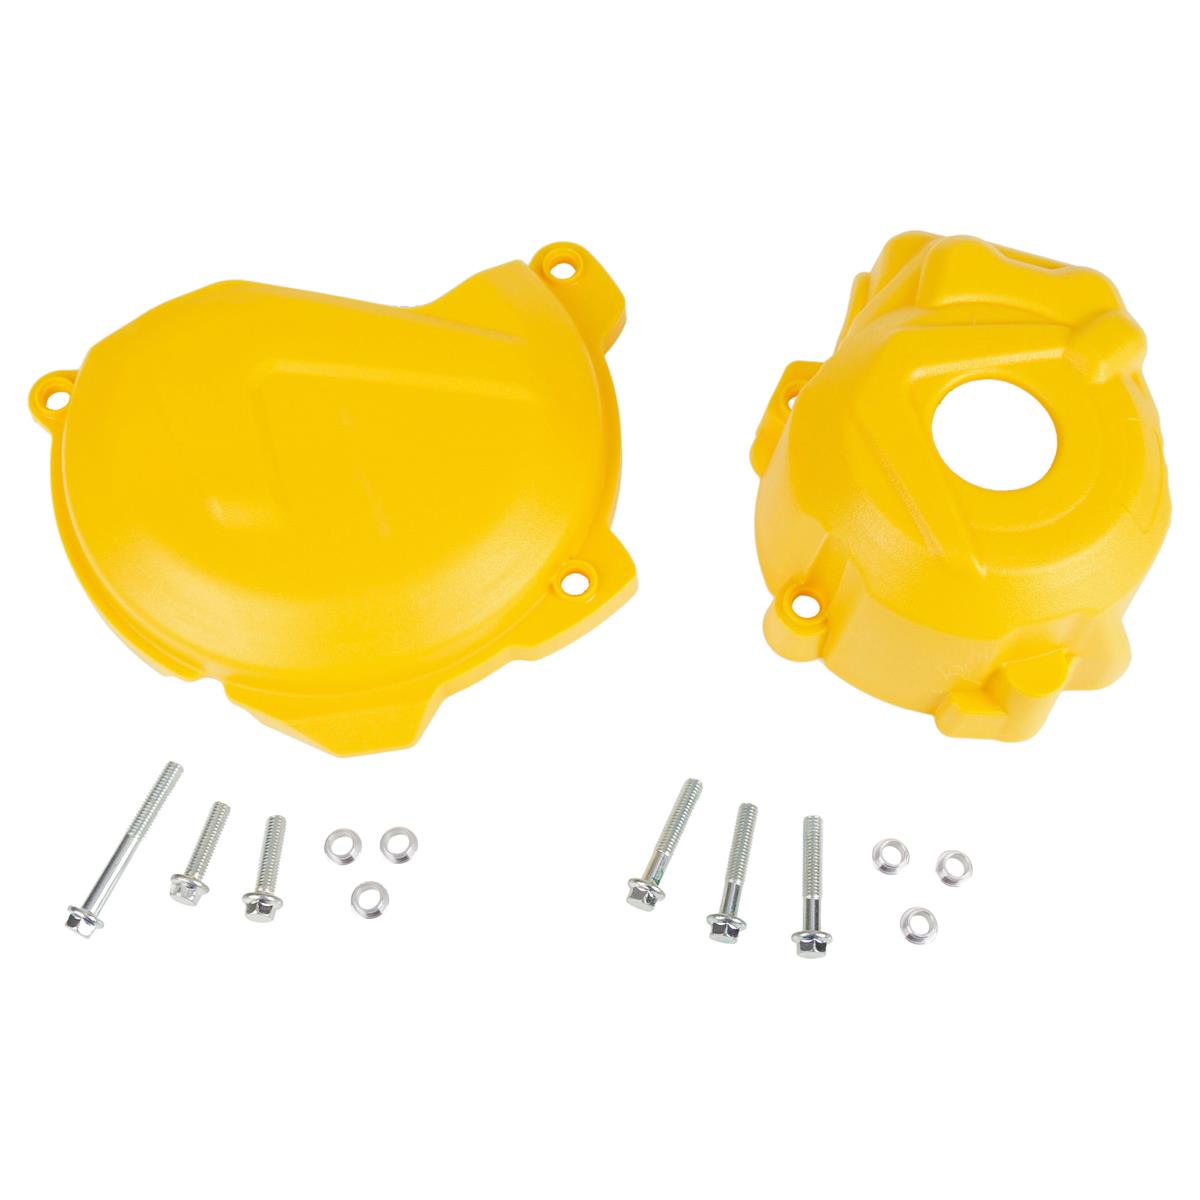 Polisport Clutch/Ignition Cover Protection  KTM SX-F 250/350 13-15, Yellow